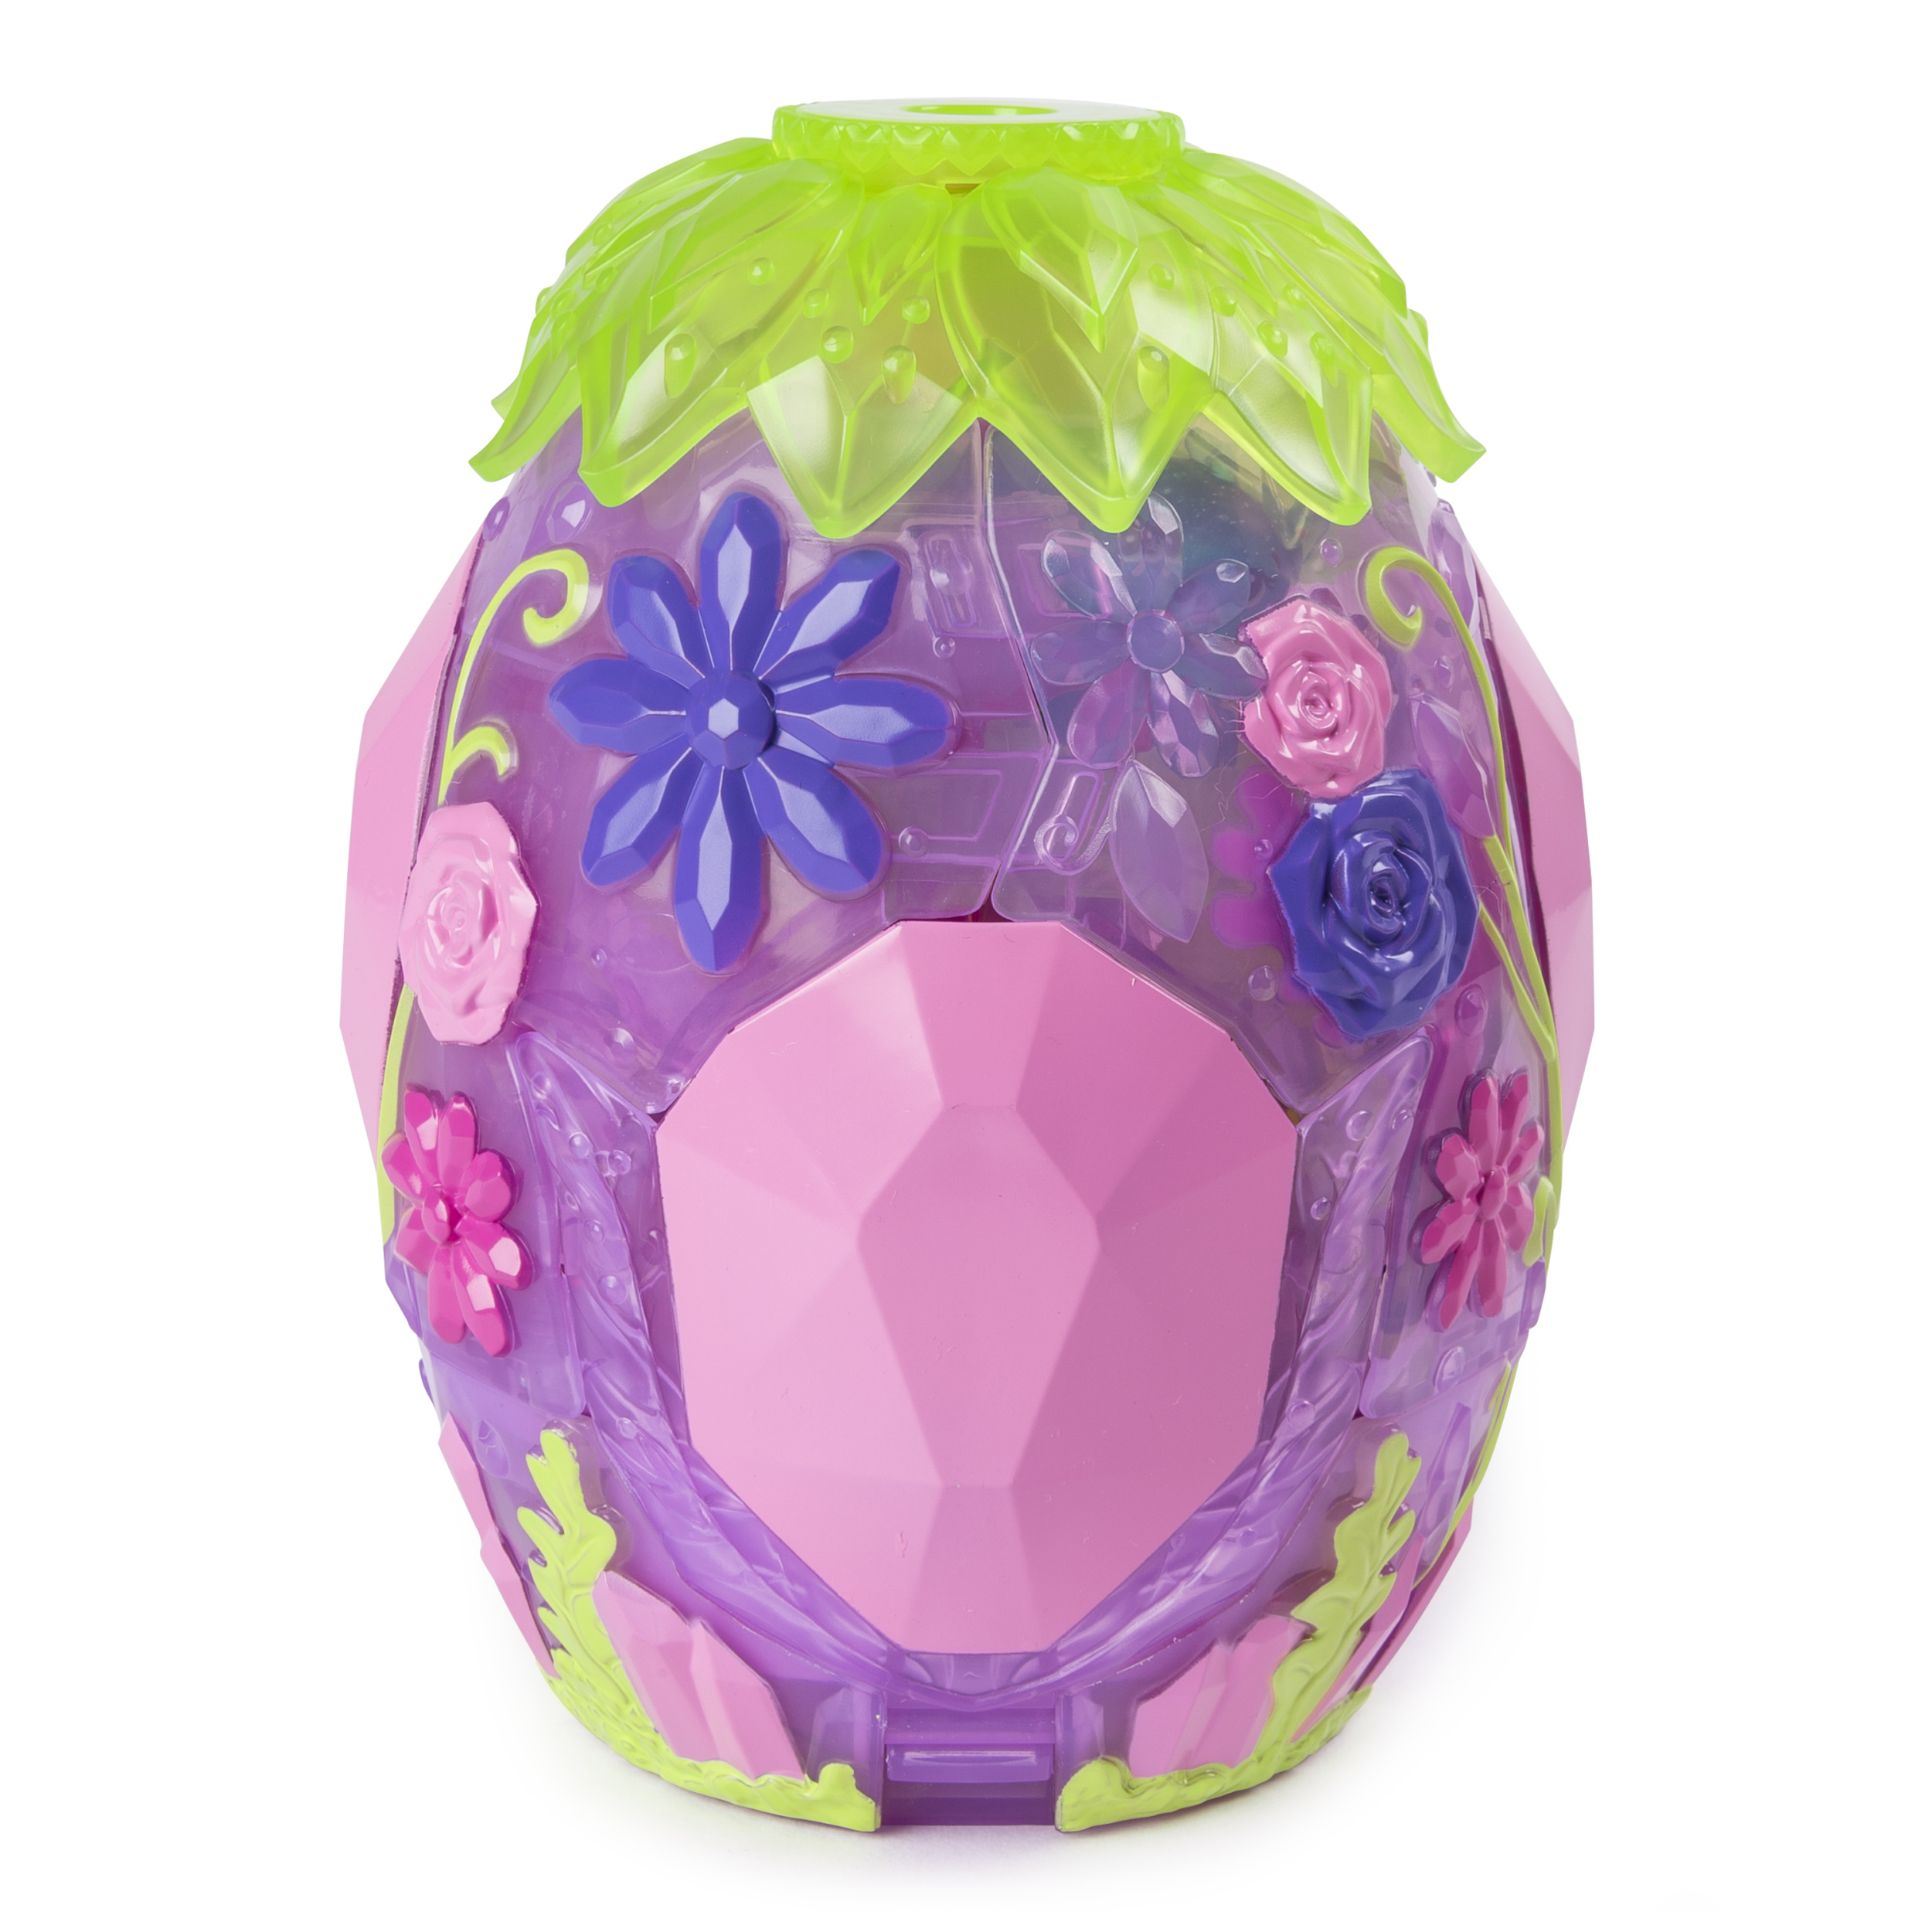 Hatchimals CollEGGtibles, Crystal Canyon Secret Scene Playset with Exclusive Hatchimals CollEGGtible - image 4 of 8